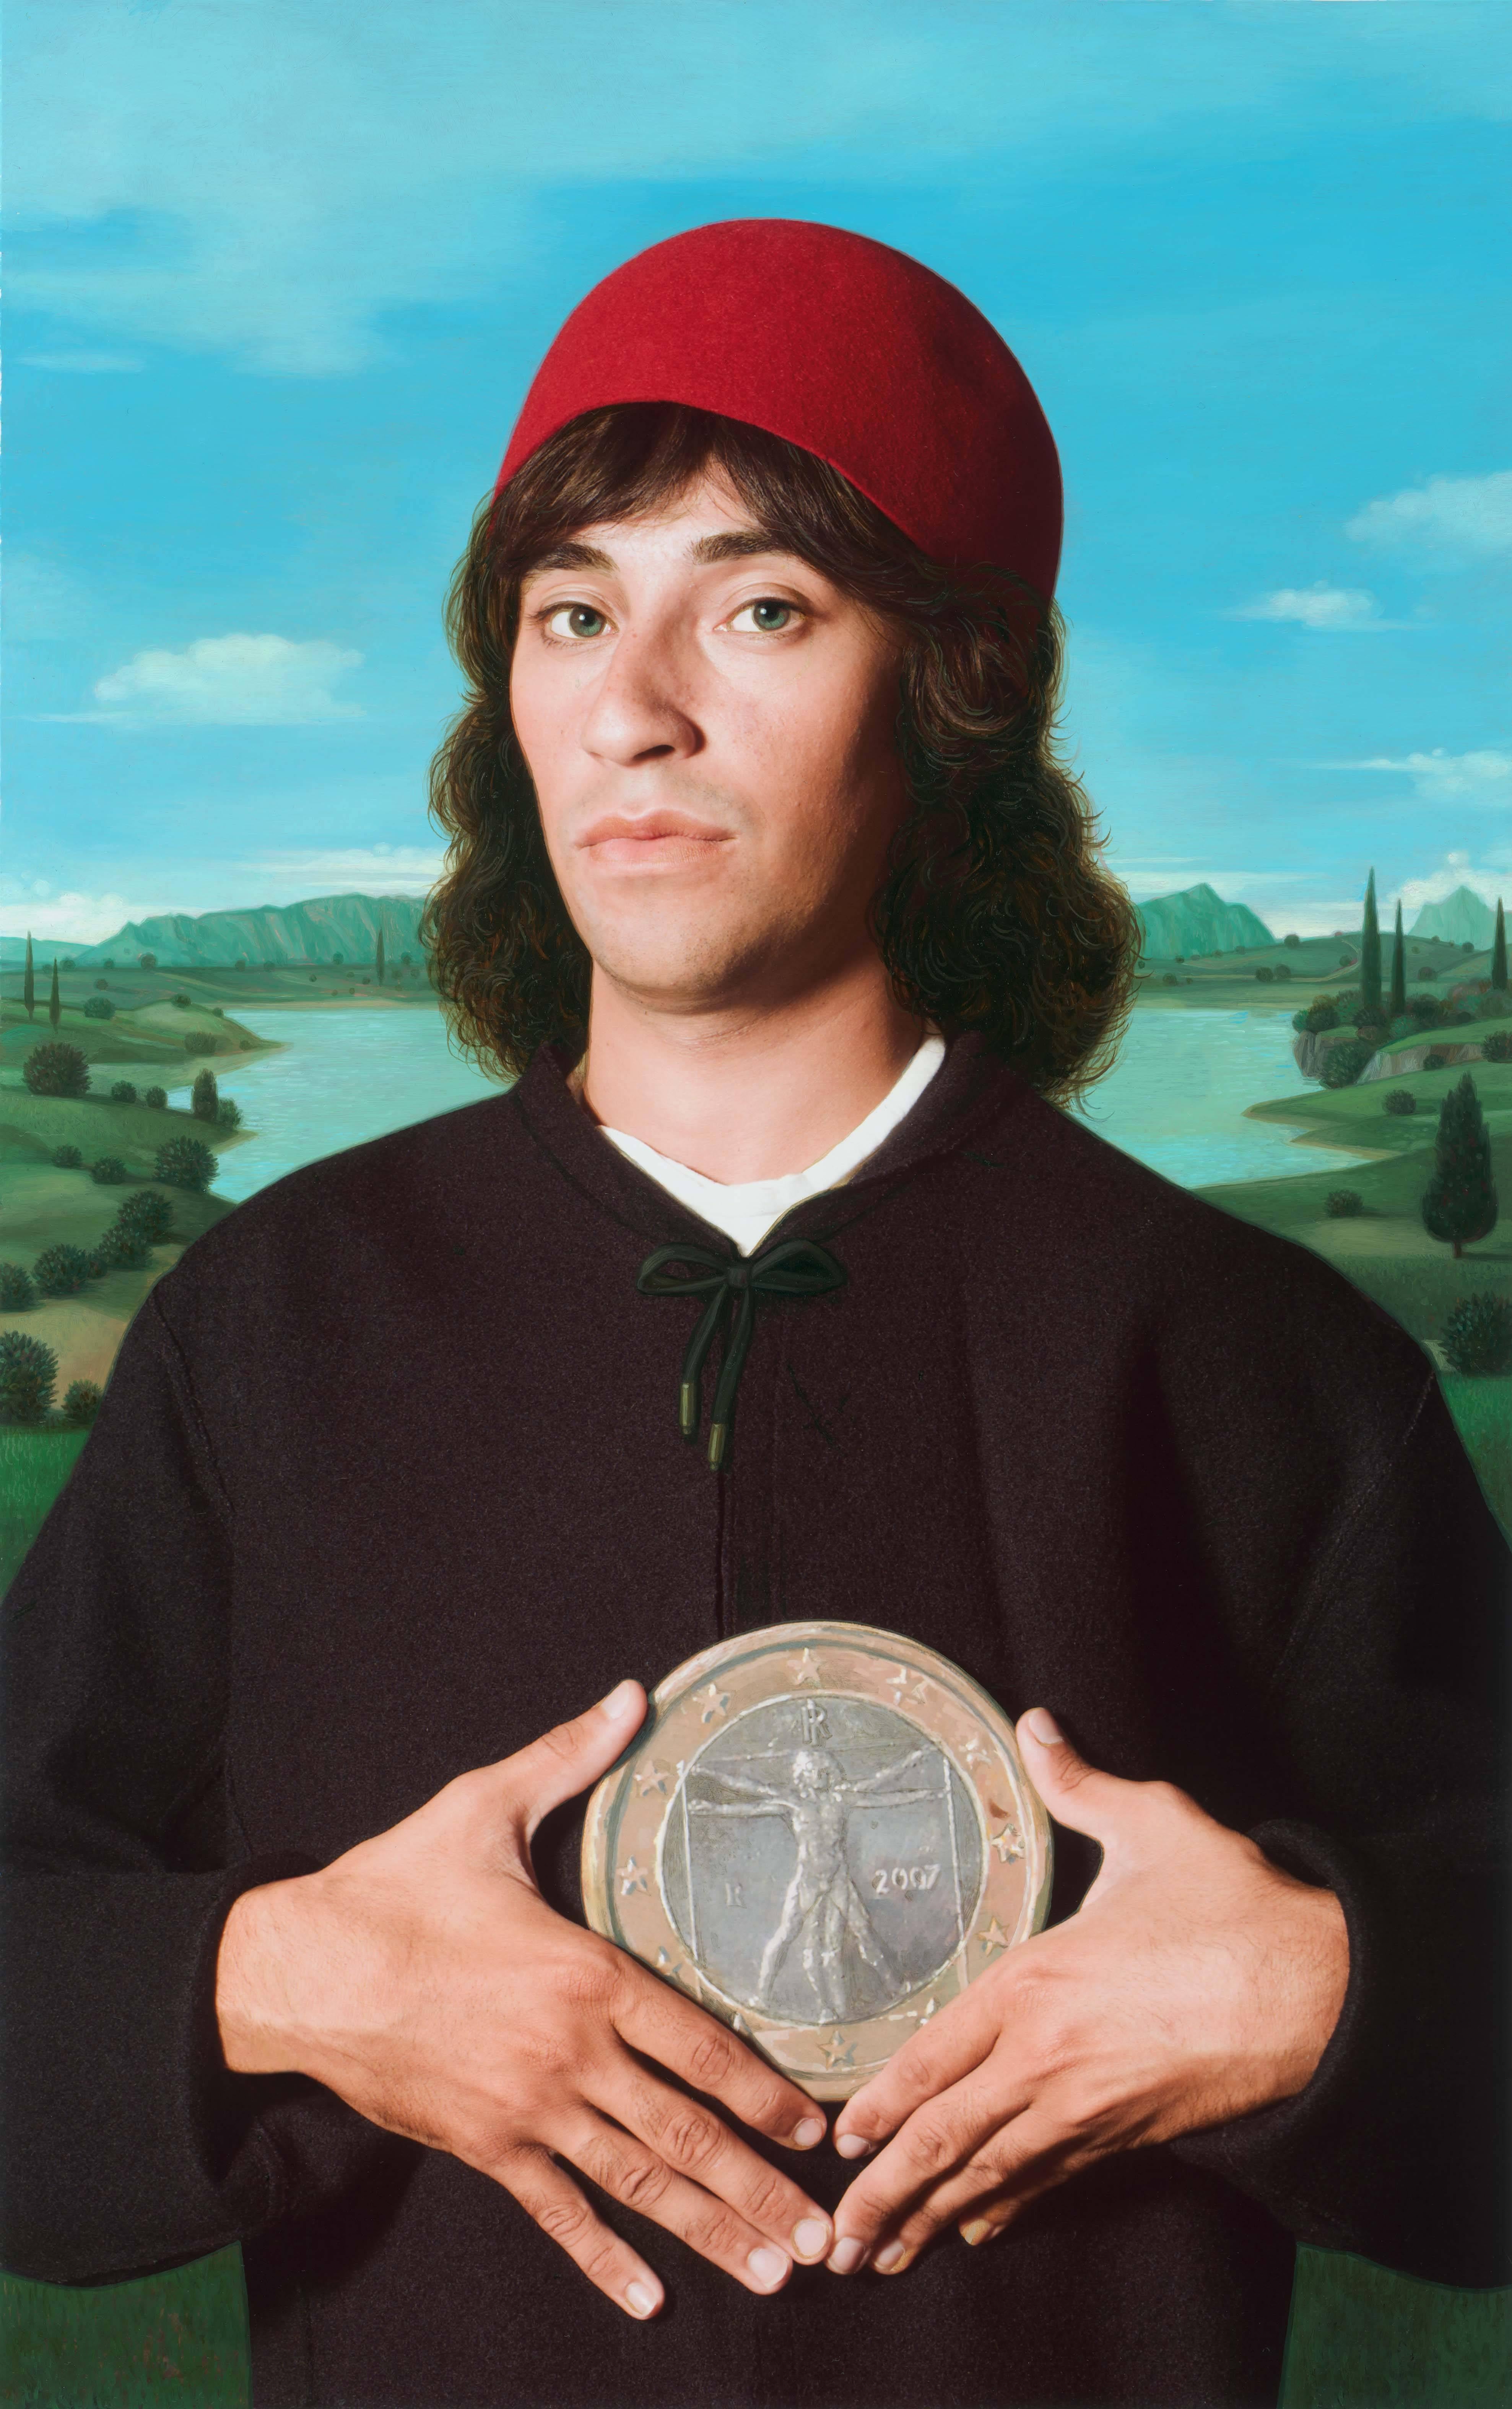 E2 - Kleinveld & Julien Figurative Photograph - Ode to Botticelli's Portrait of a Man with a Medal of Cosimo the Elder